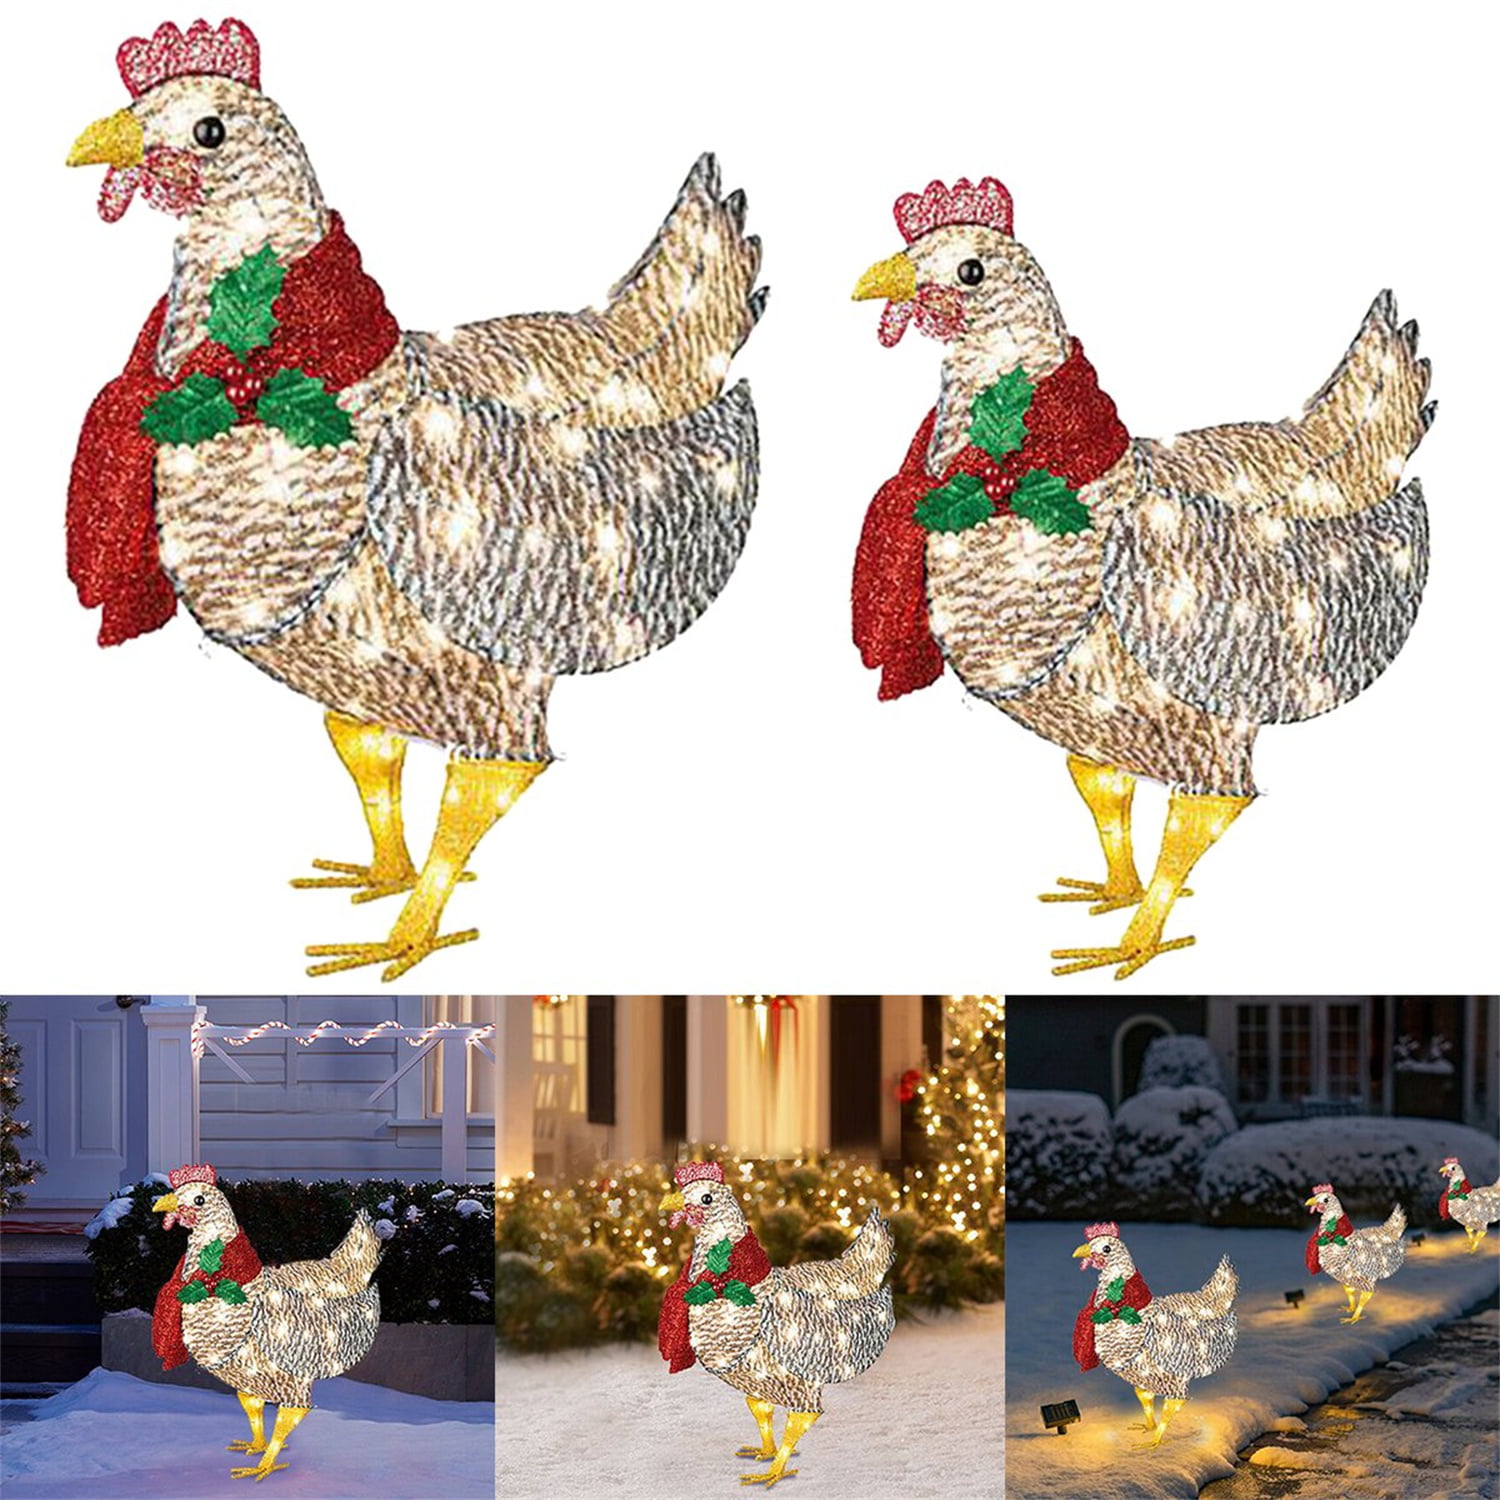 L Chicken Christmas Ornaments Solar Powered with 50 Mini Lights,Rooster Animals Statue Decor for Ground Christmas Outdoor Decorations Light-Up Chicken with Scarf Holiday Decoration